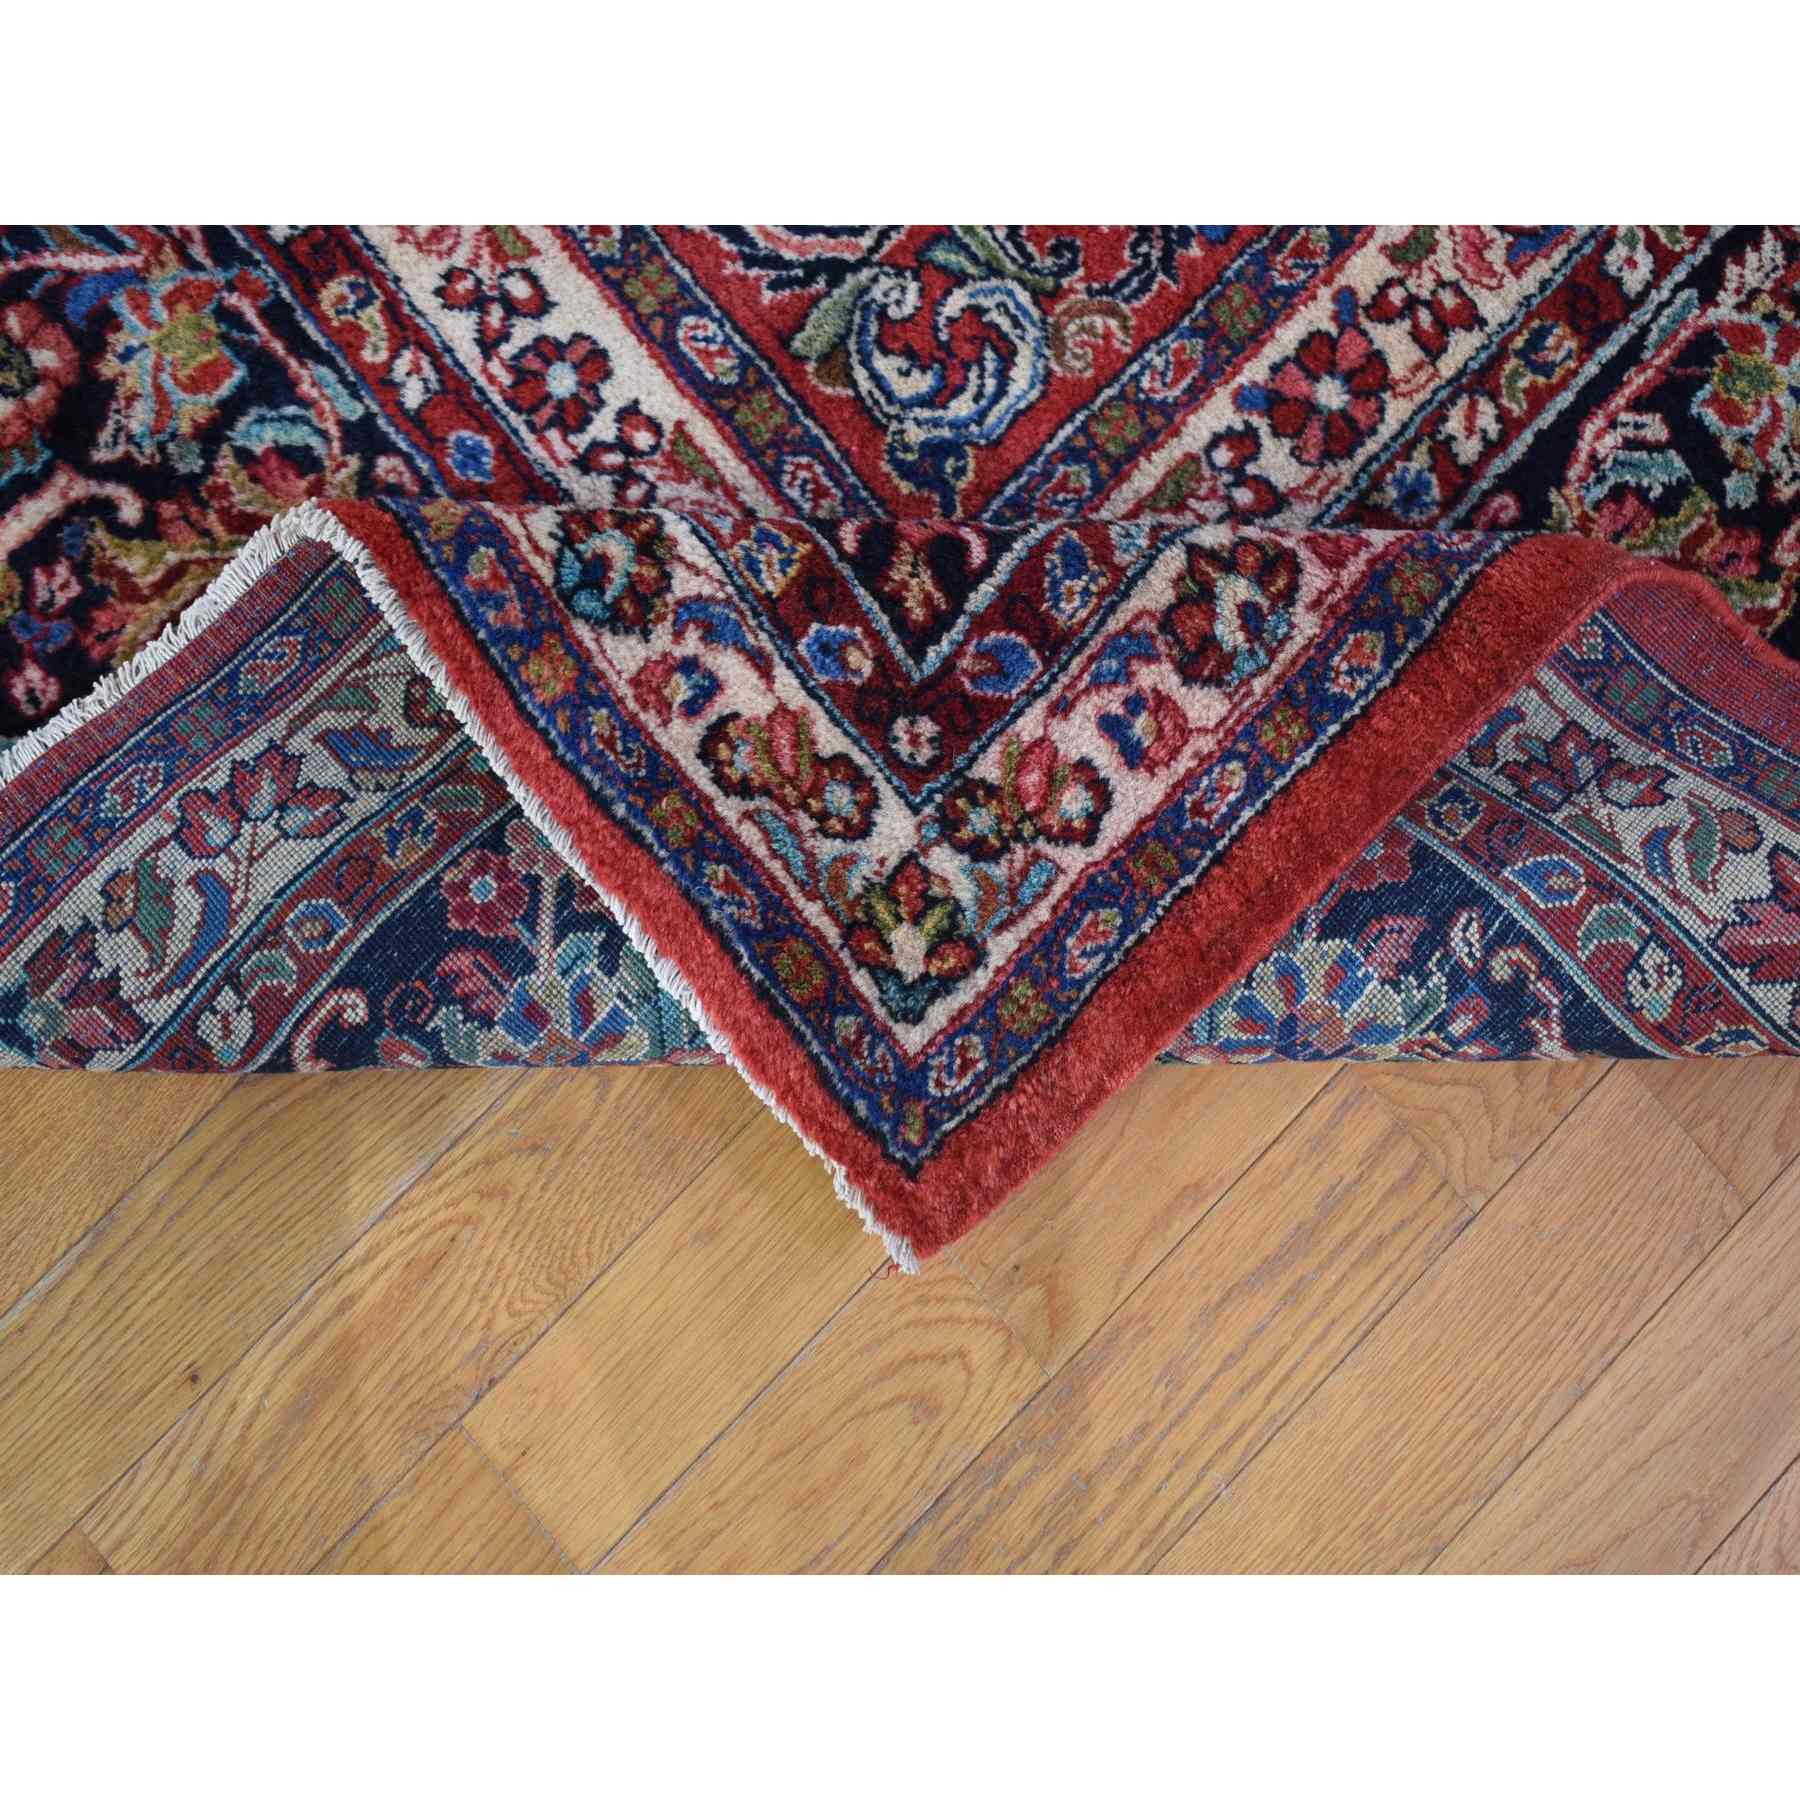 Antique-Hand-Knotted-Rug-400270